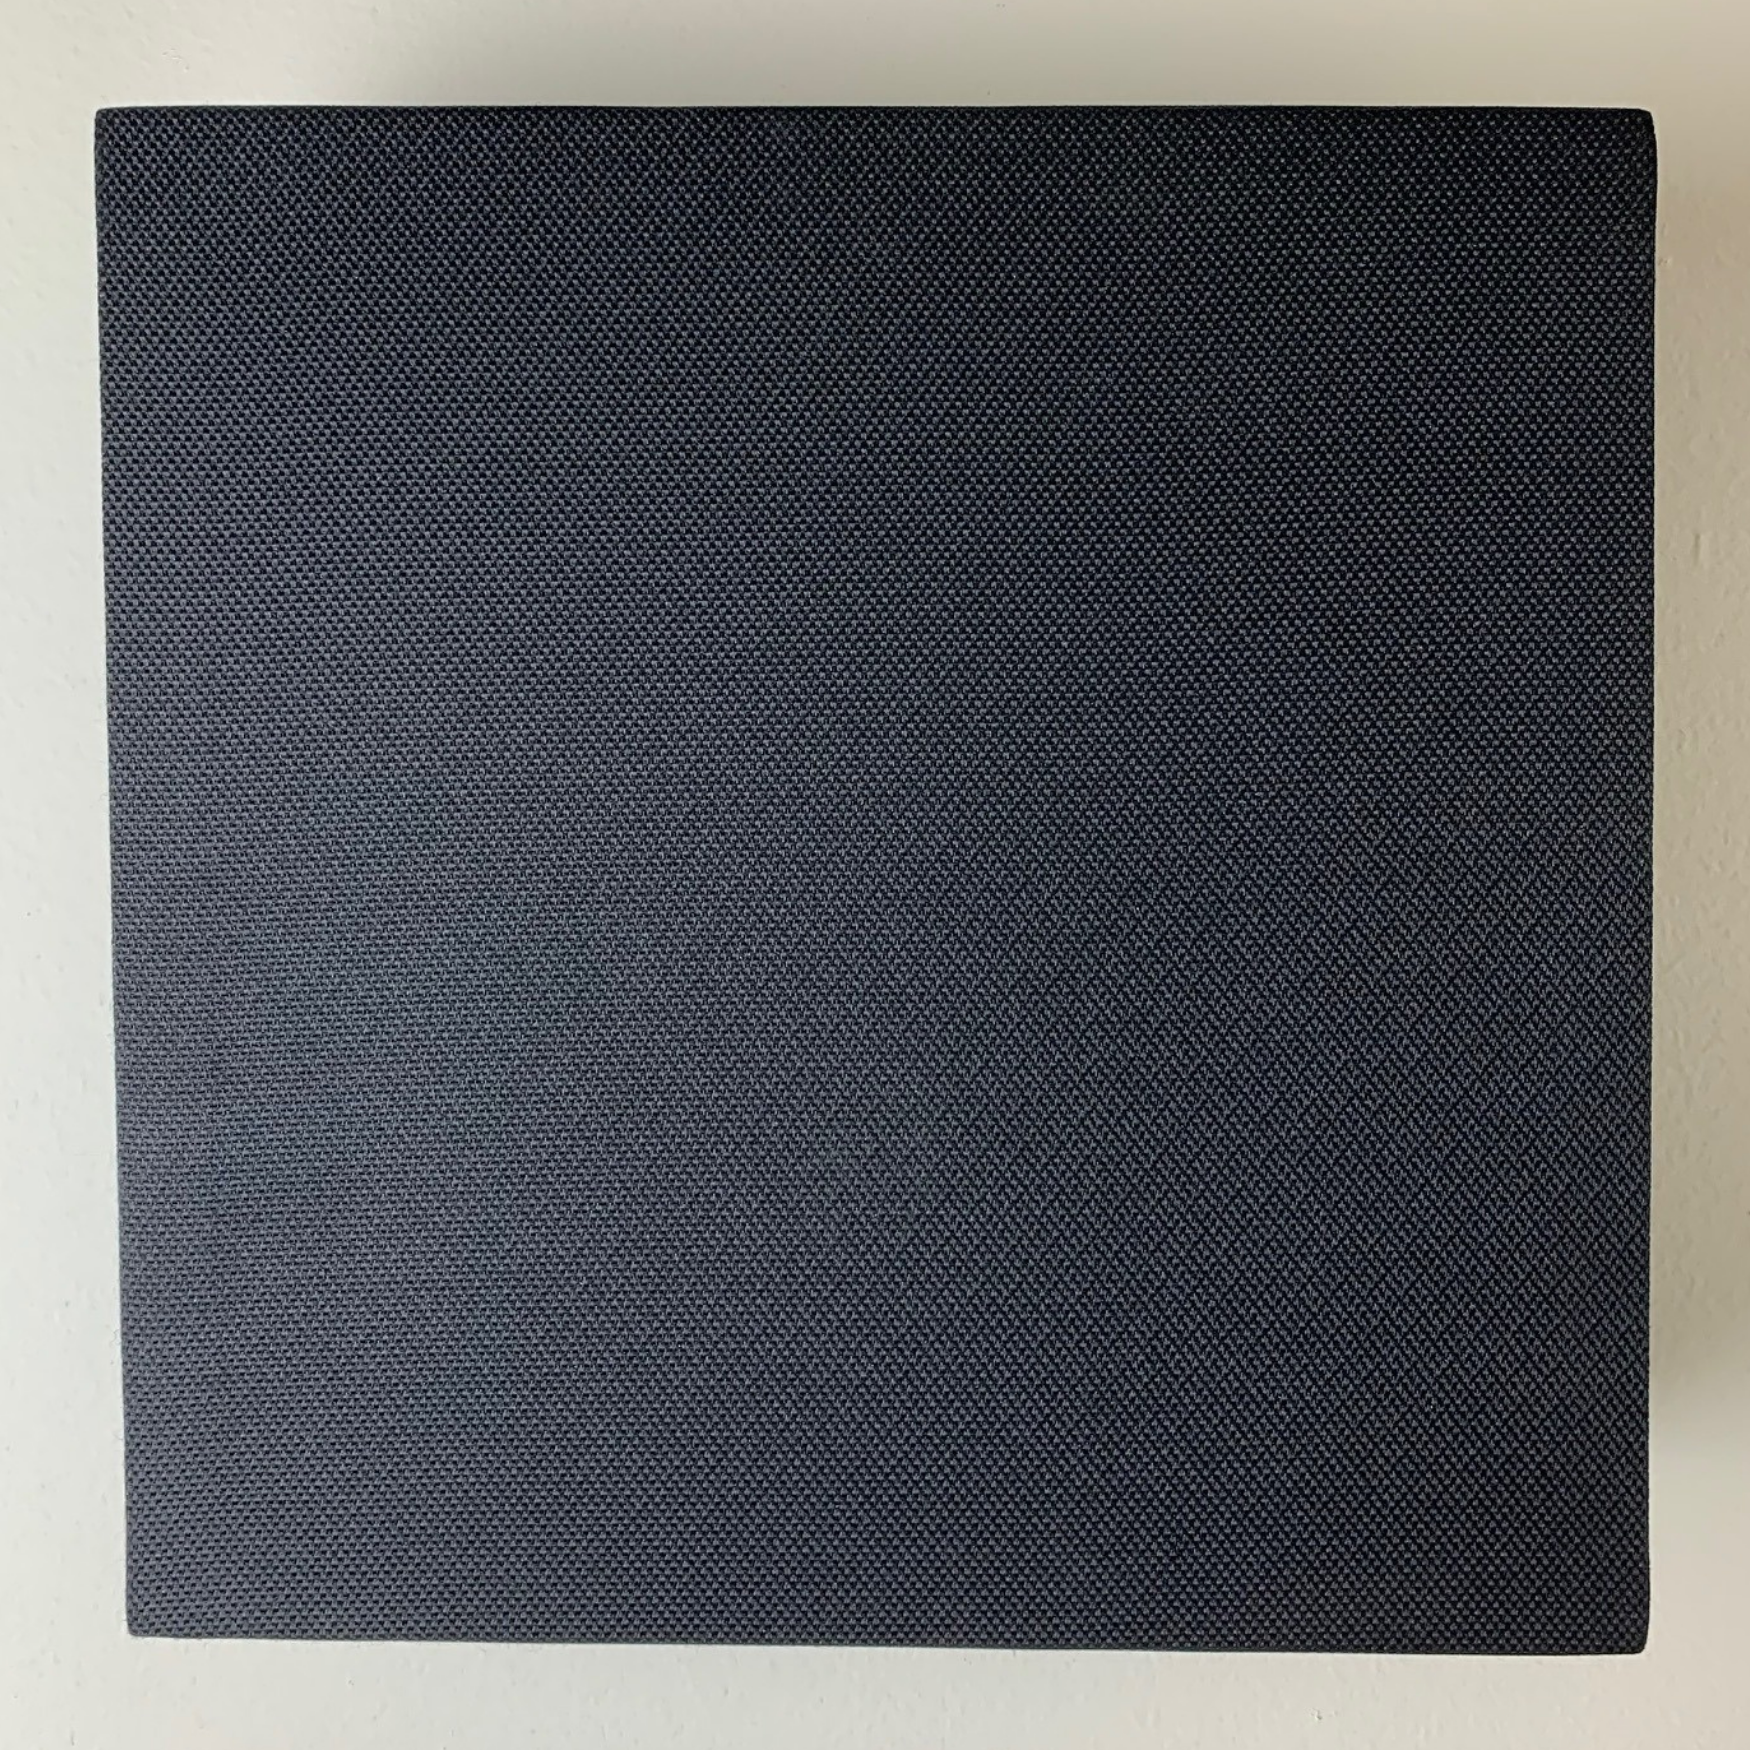 1 Inch Acoustic Foam Pyramid Style Panels - 13 Color Options